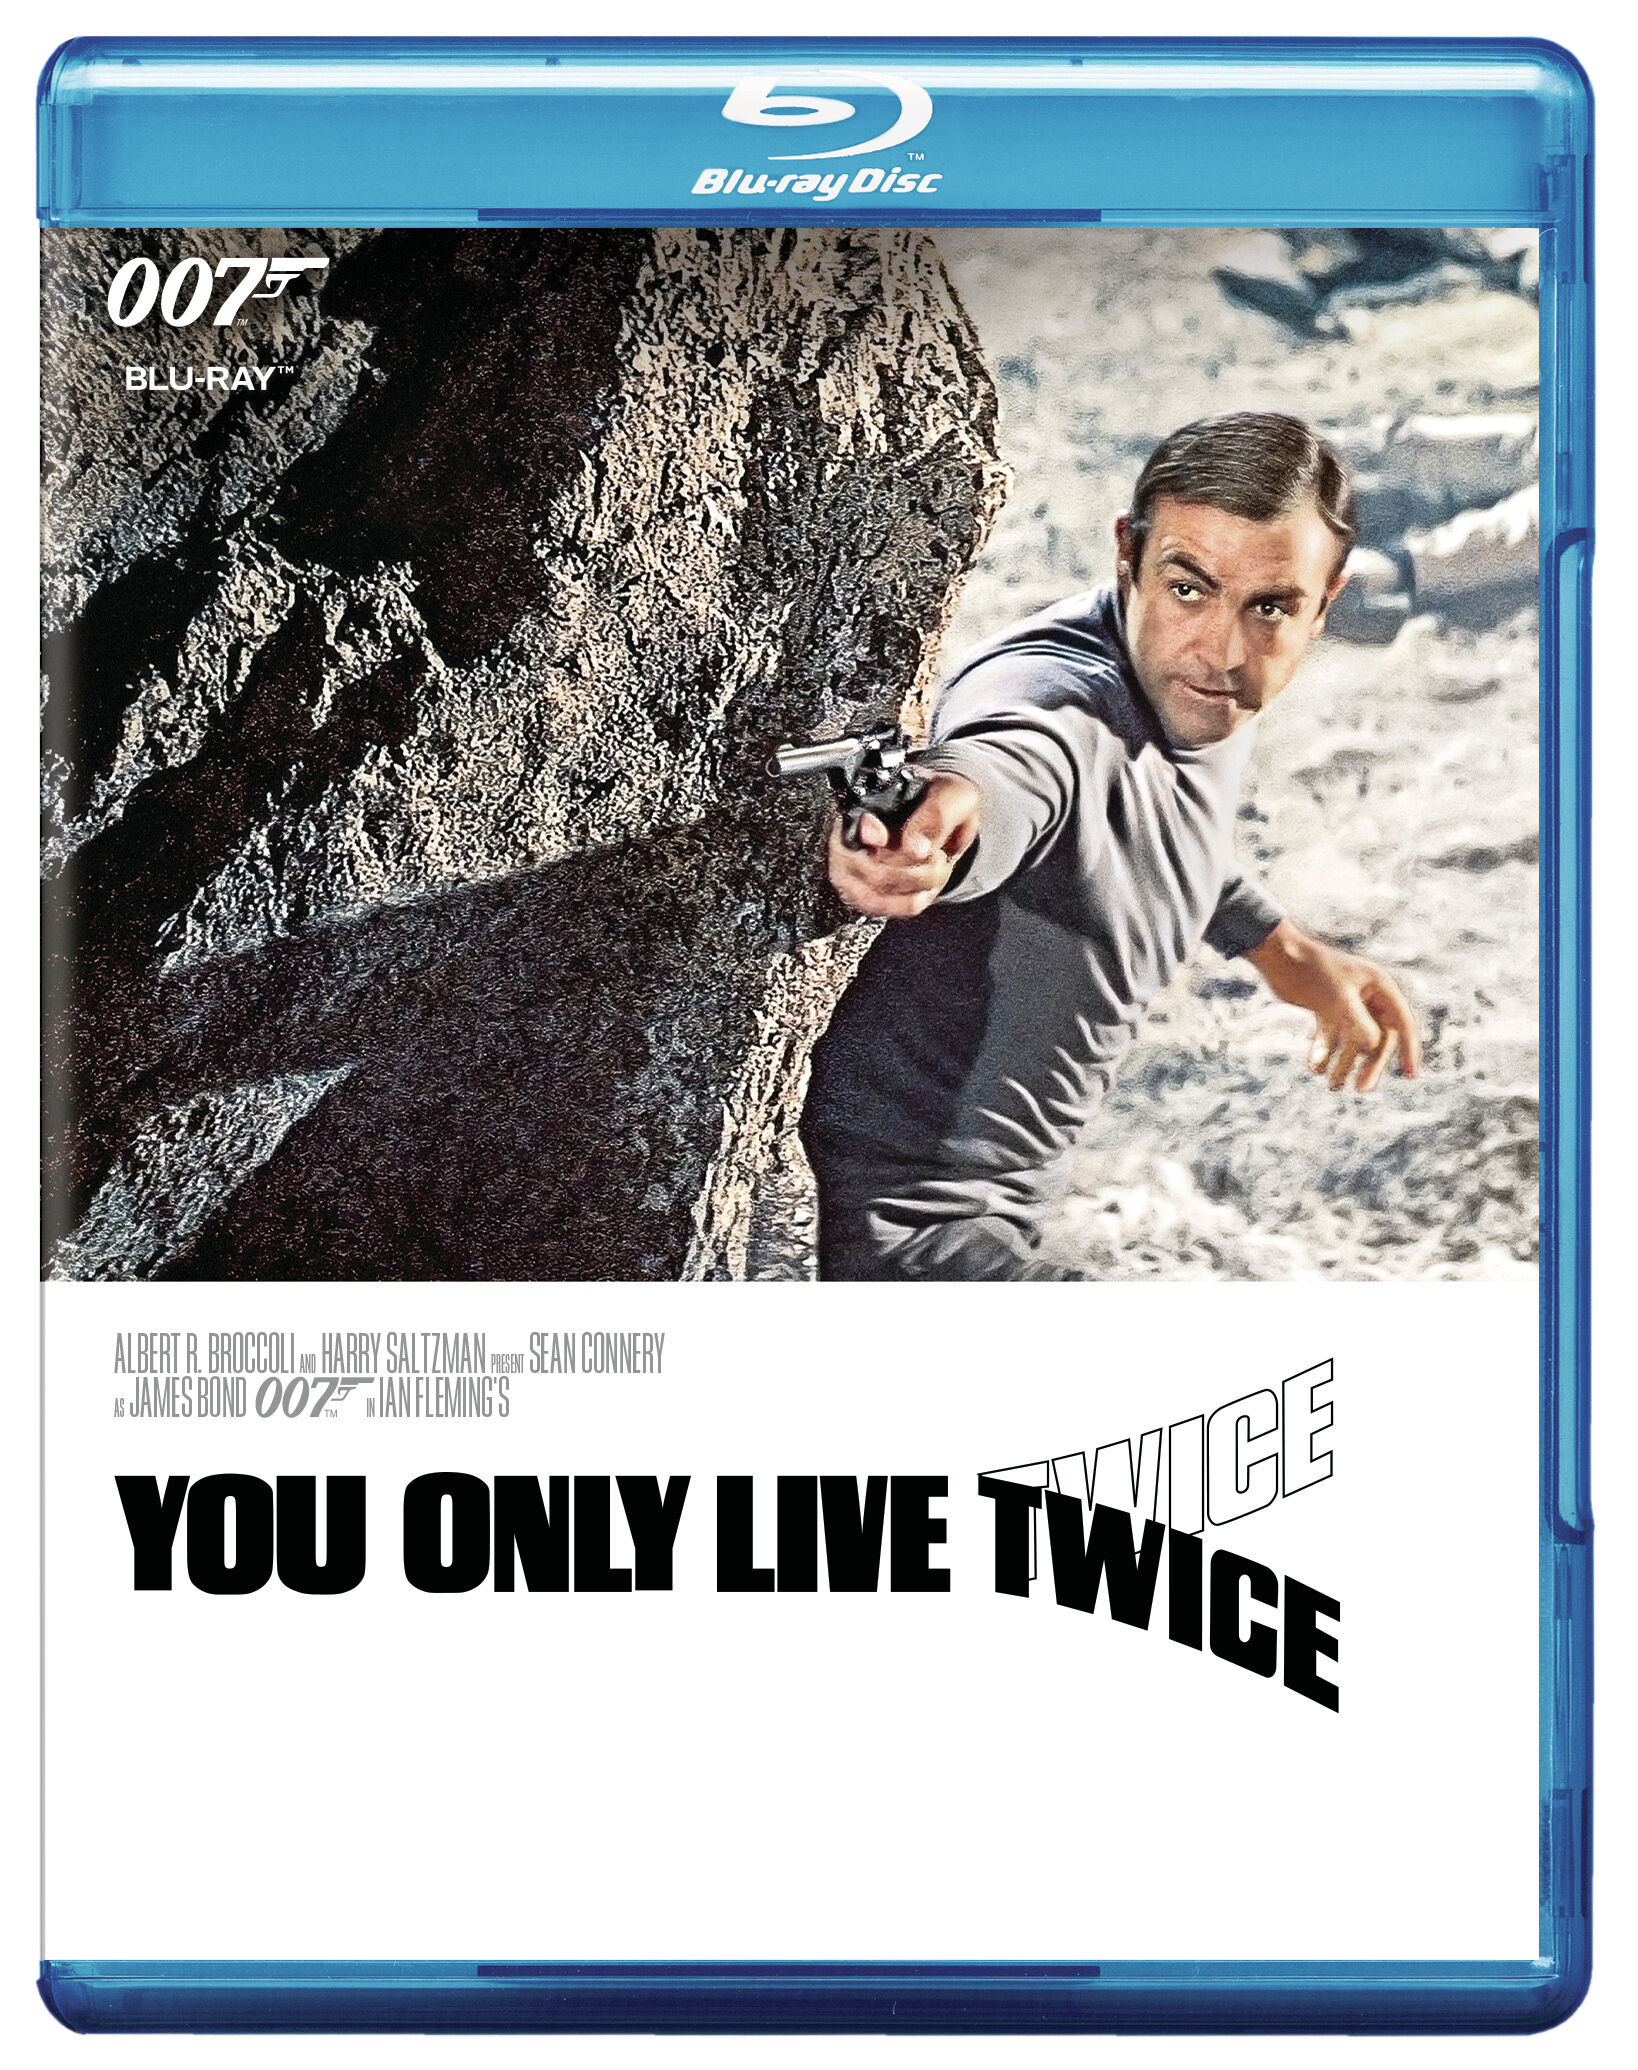 You Only Live Twice (Blu-ray New Box Art) - Blu-ray [ 1967 ]  - Action Movies On Blu-ray - Movies On GRUV